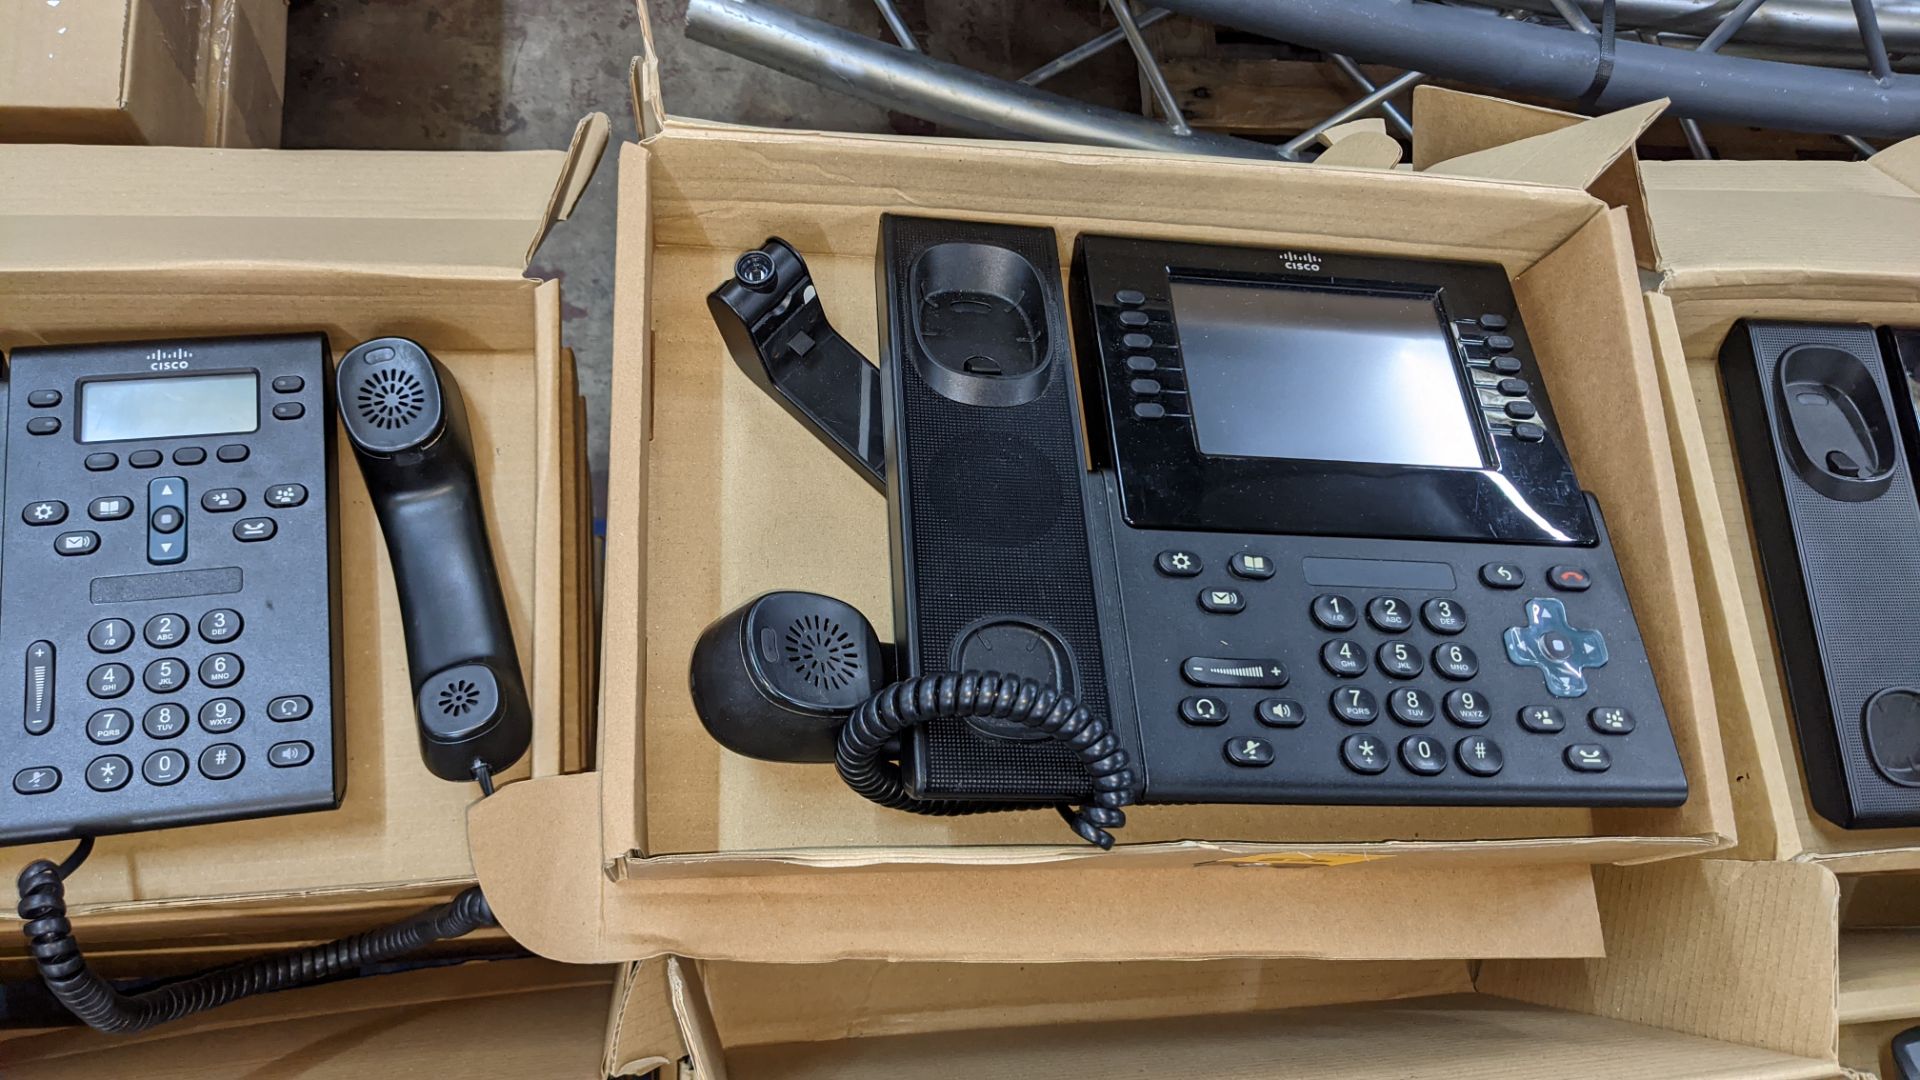 9 off Cisco telephone handsets model CP-9971 - Image 2 of 3